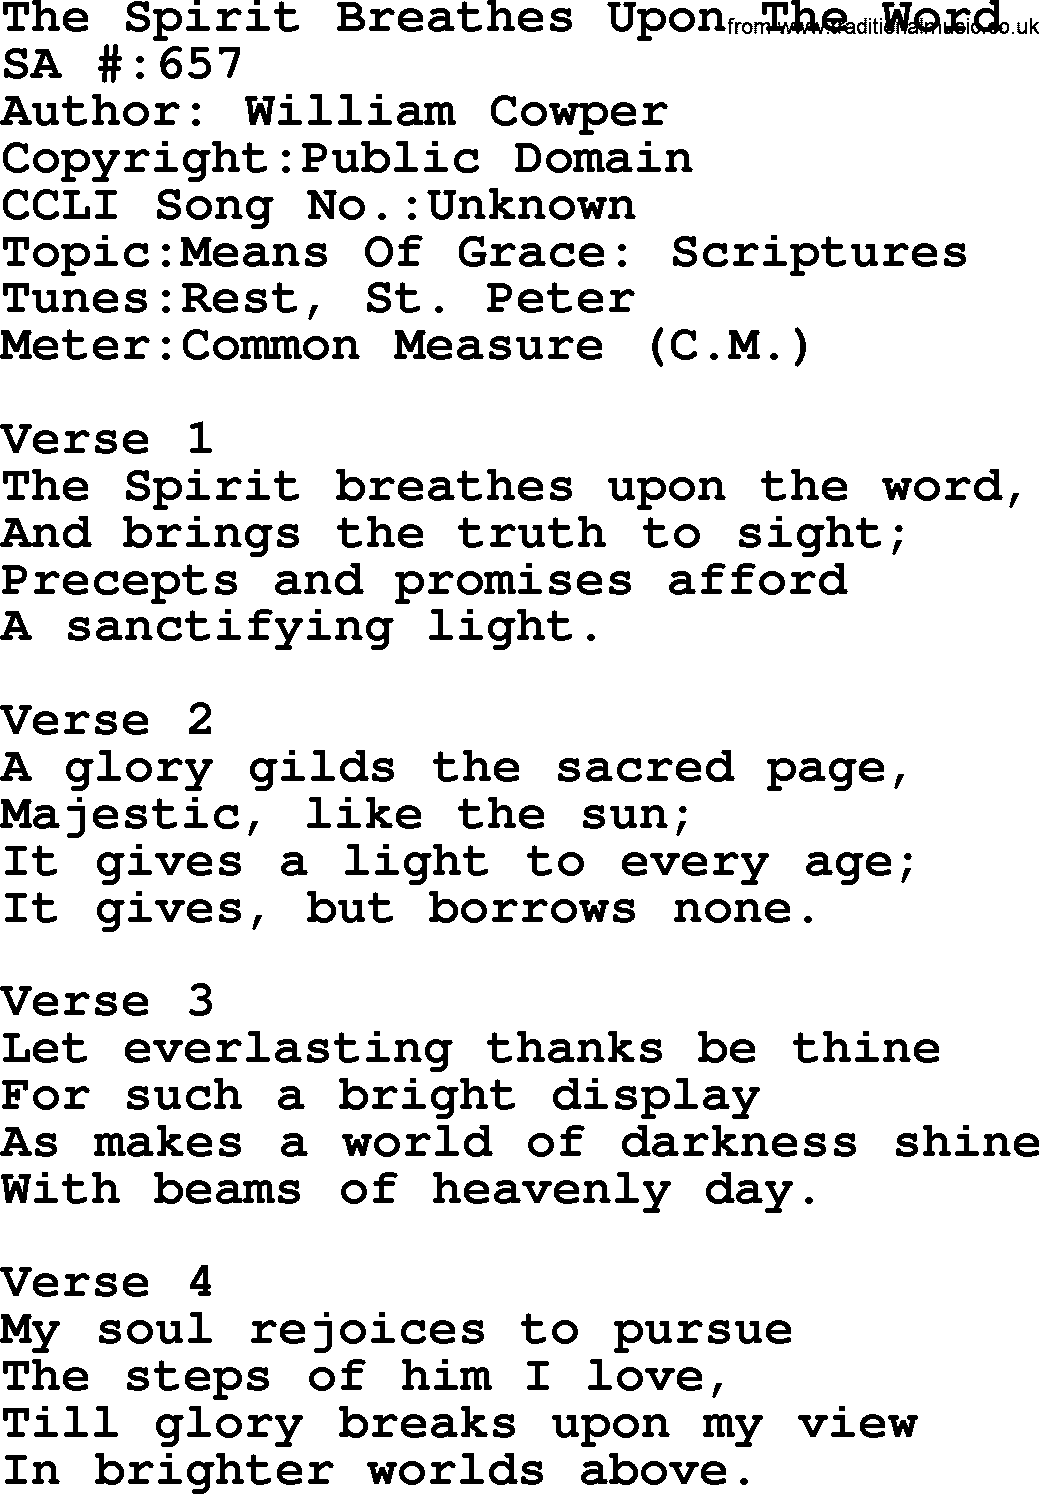 Salvation Army Hymnal, title: The Spirit Breathes Upon The Word, with lyrics and PDF,